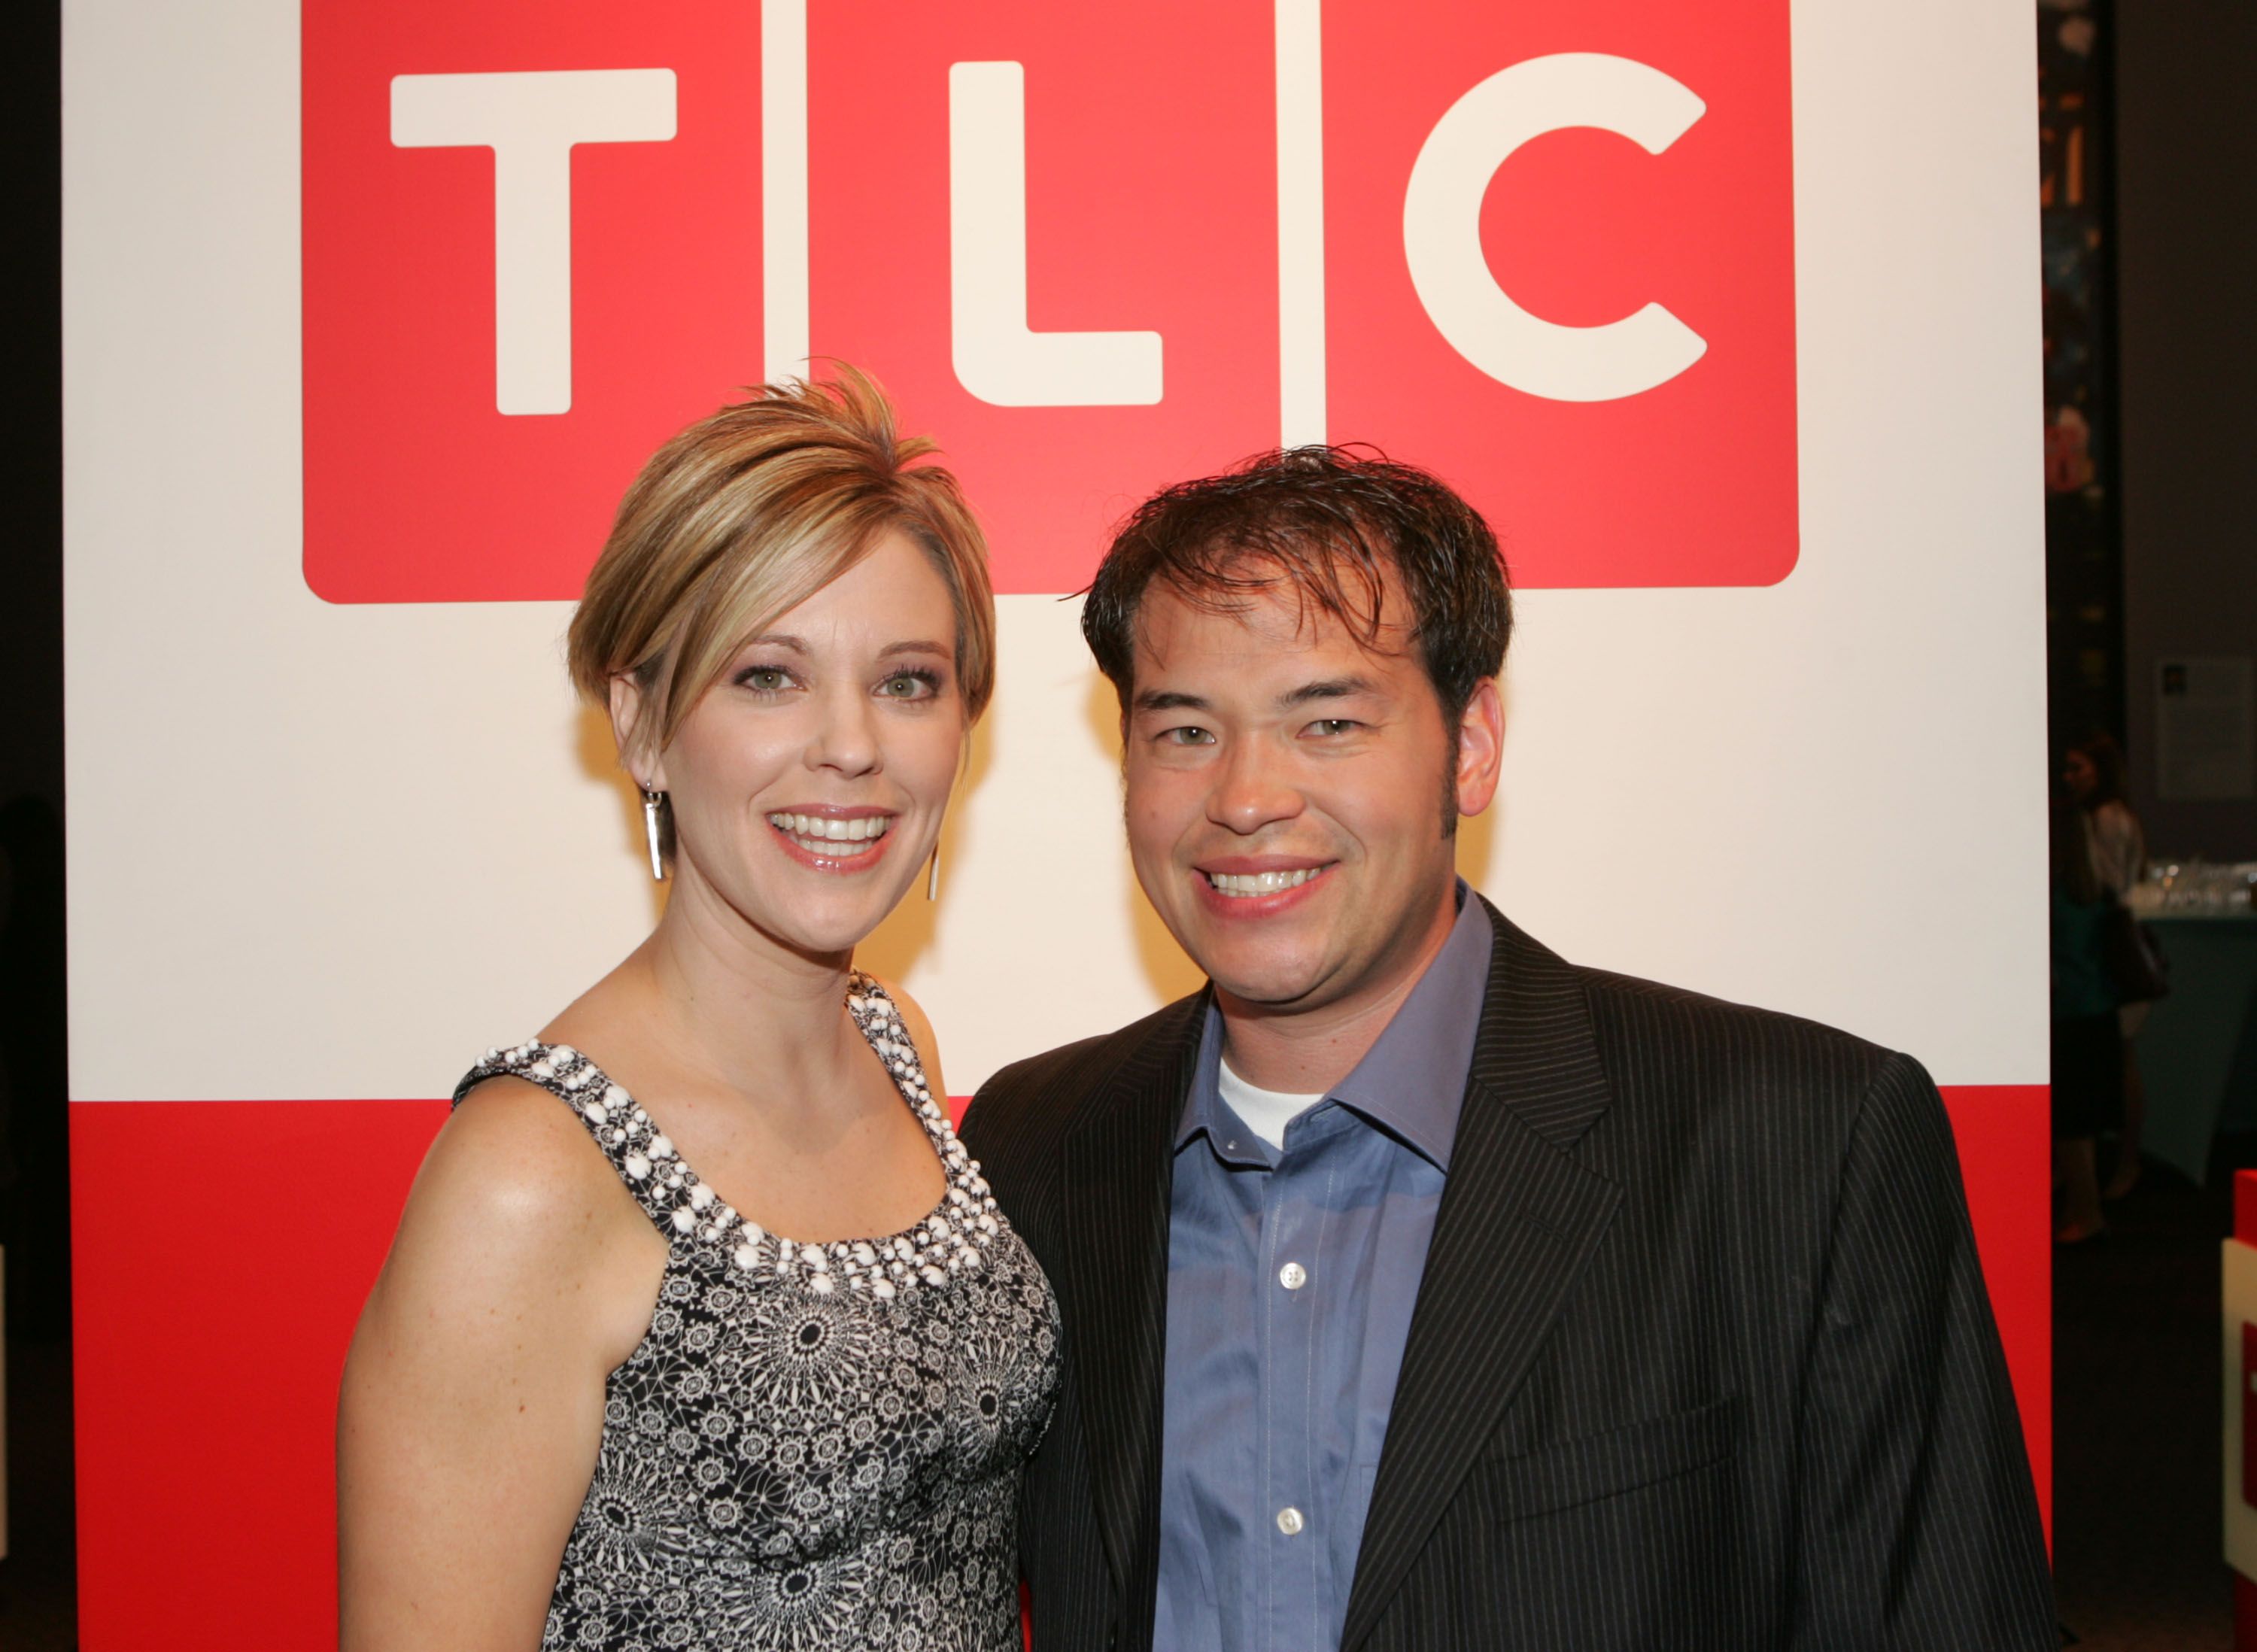 John and Kate Gosselin during the Discovery Upfront Presentation NY - Talent Images at the Frederick P. Rose Hall on April 23, 2008 in New York City. | Source: Getty Images